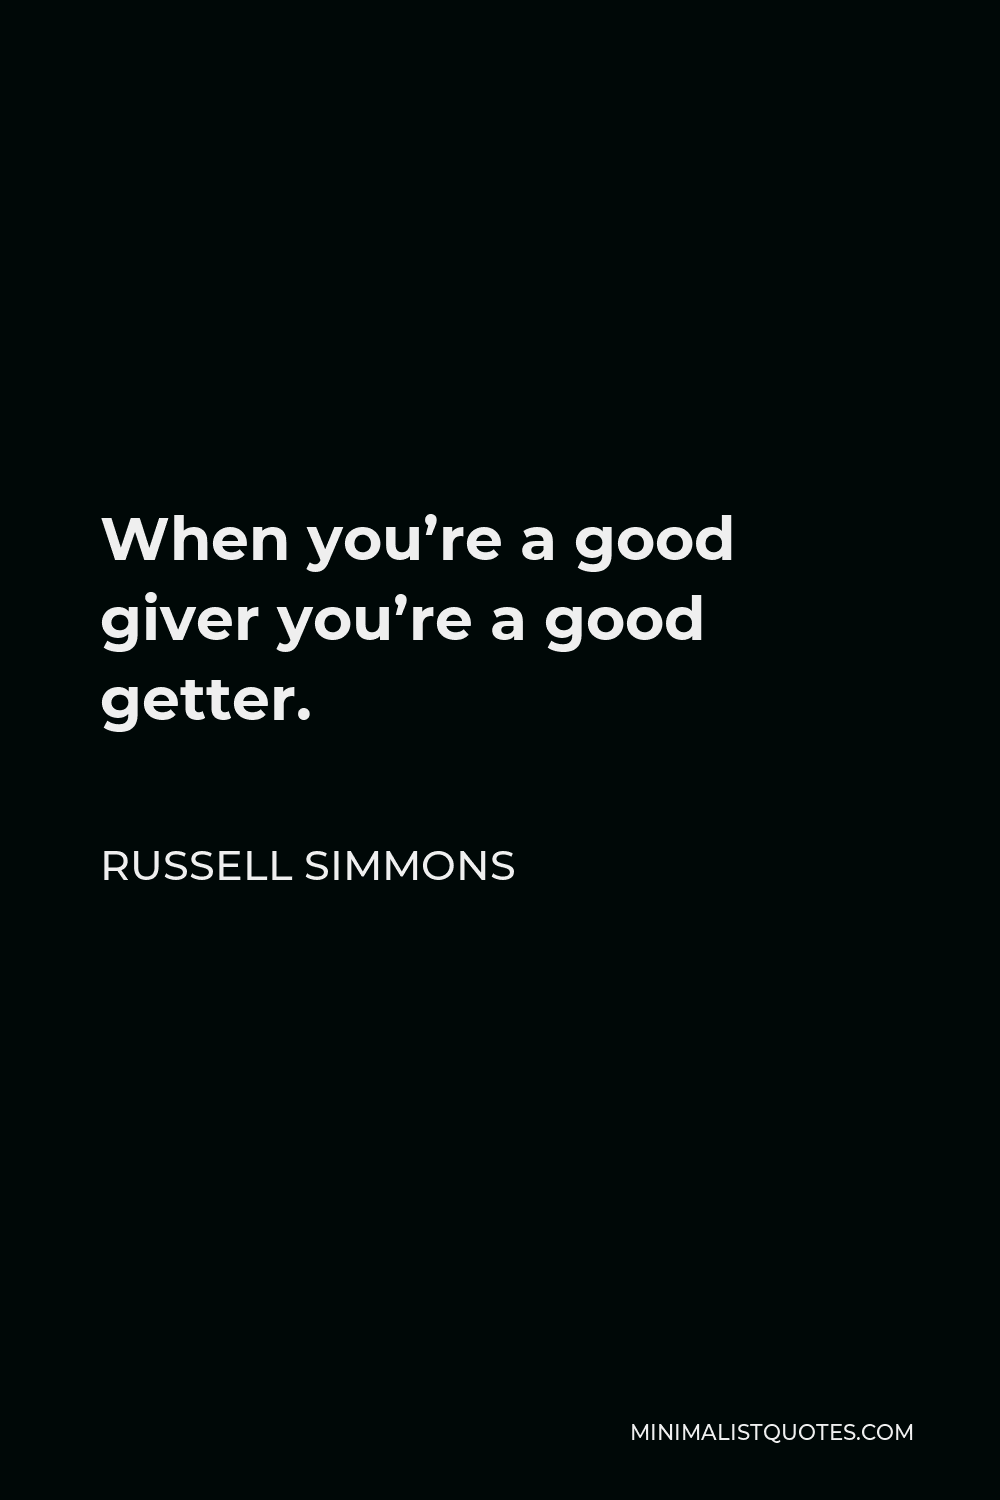 Russell Simmons Quote - When you’re a good giver you’re a good getter.